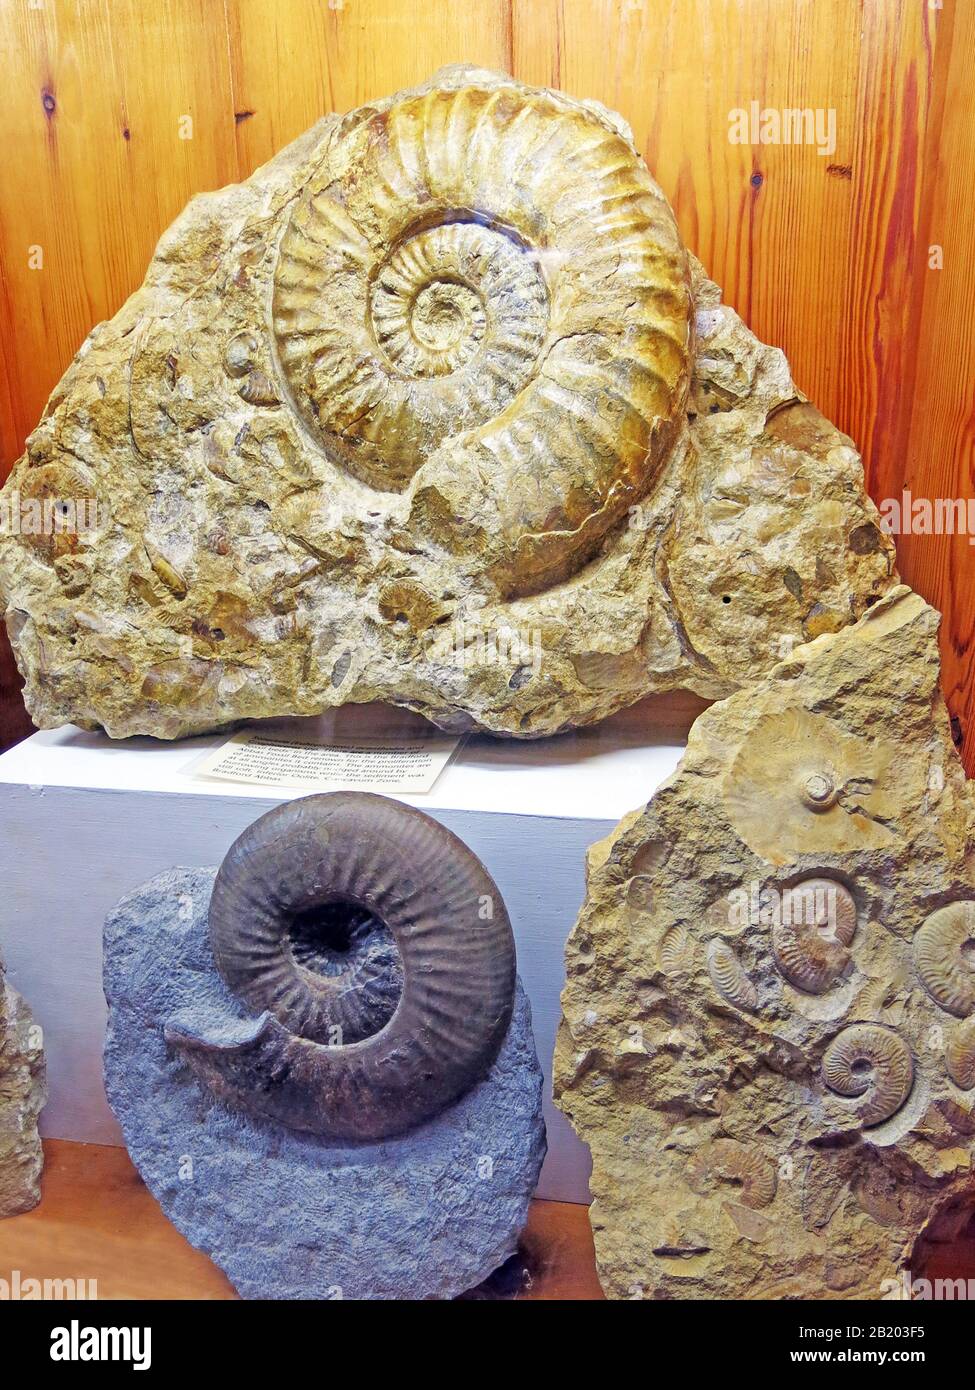 An impressive display of ammonites and other fossils in the cellars of Sherborne 'New' Castle of 1594, Sherborne, Dorset, England, UK Stock Photo